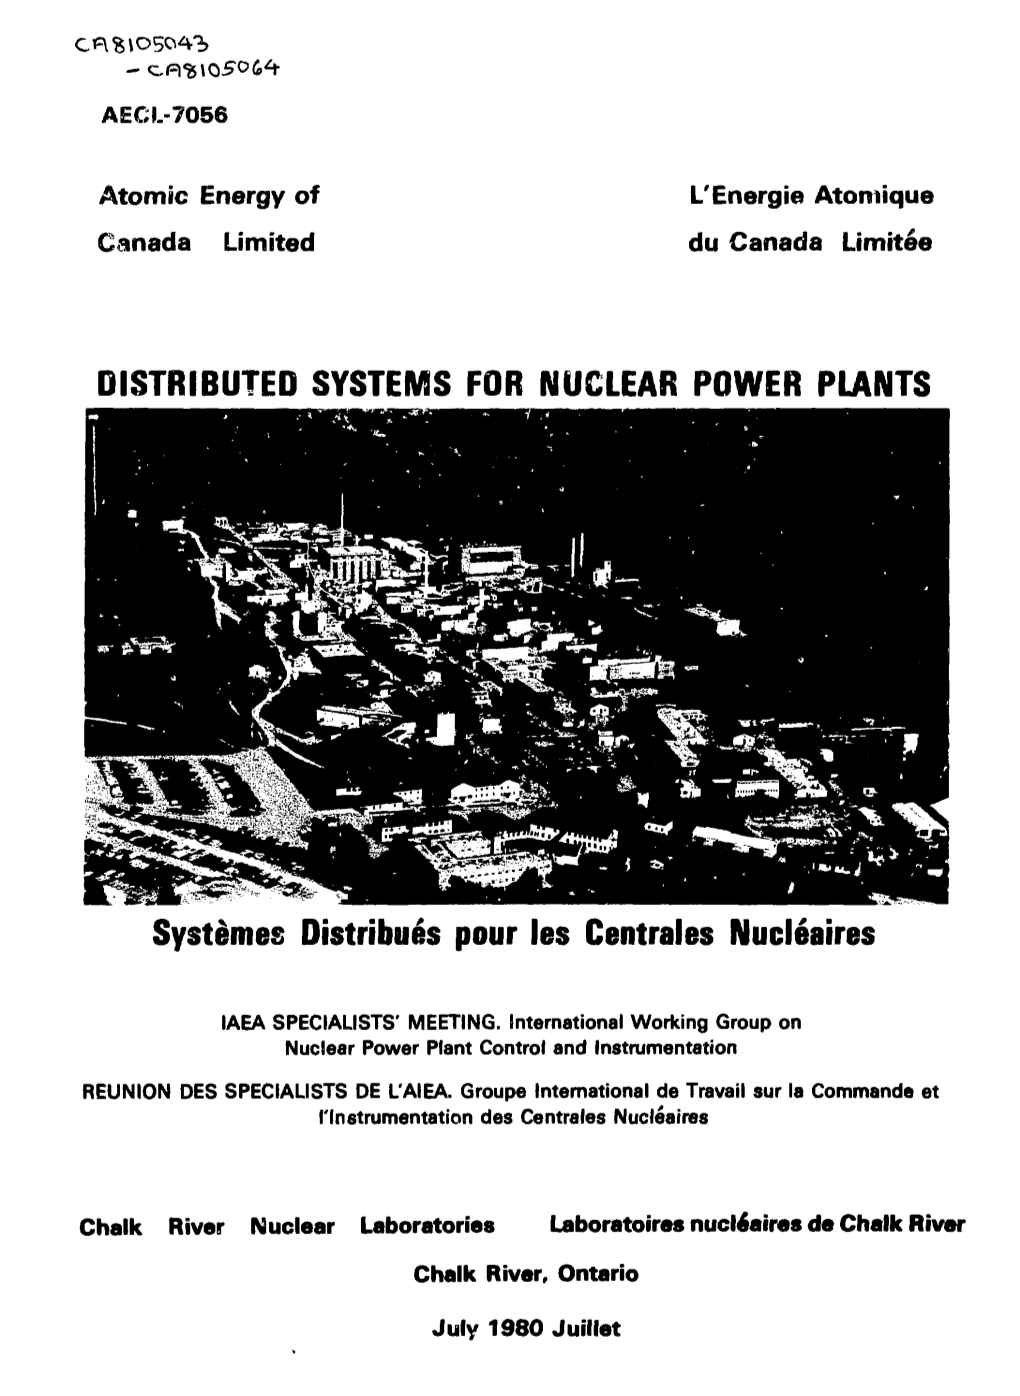 DISTRIBUTED SYSTEMS for NUCLEAR POWER PLANTS Systemes Distribues Pour Les Centrales Nucleaires